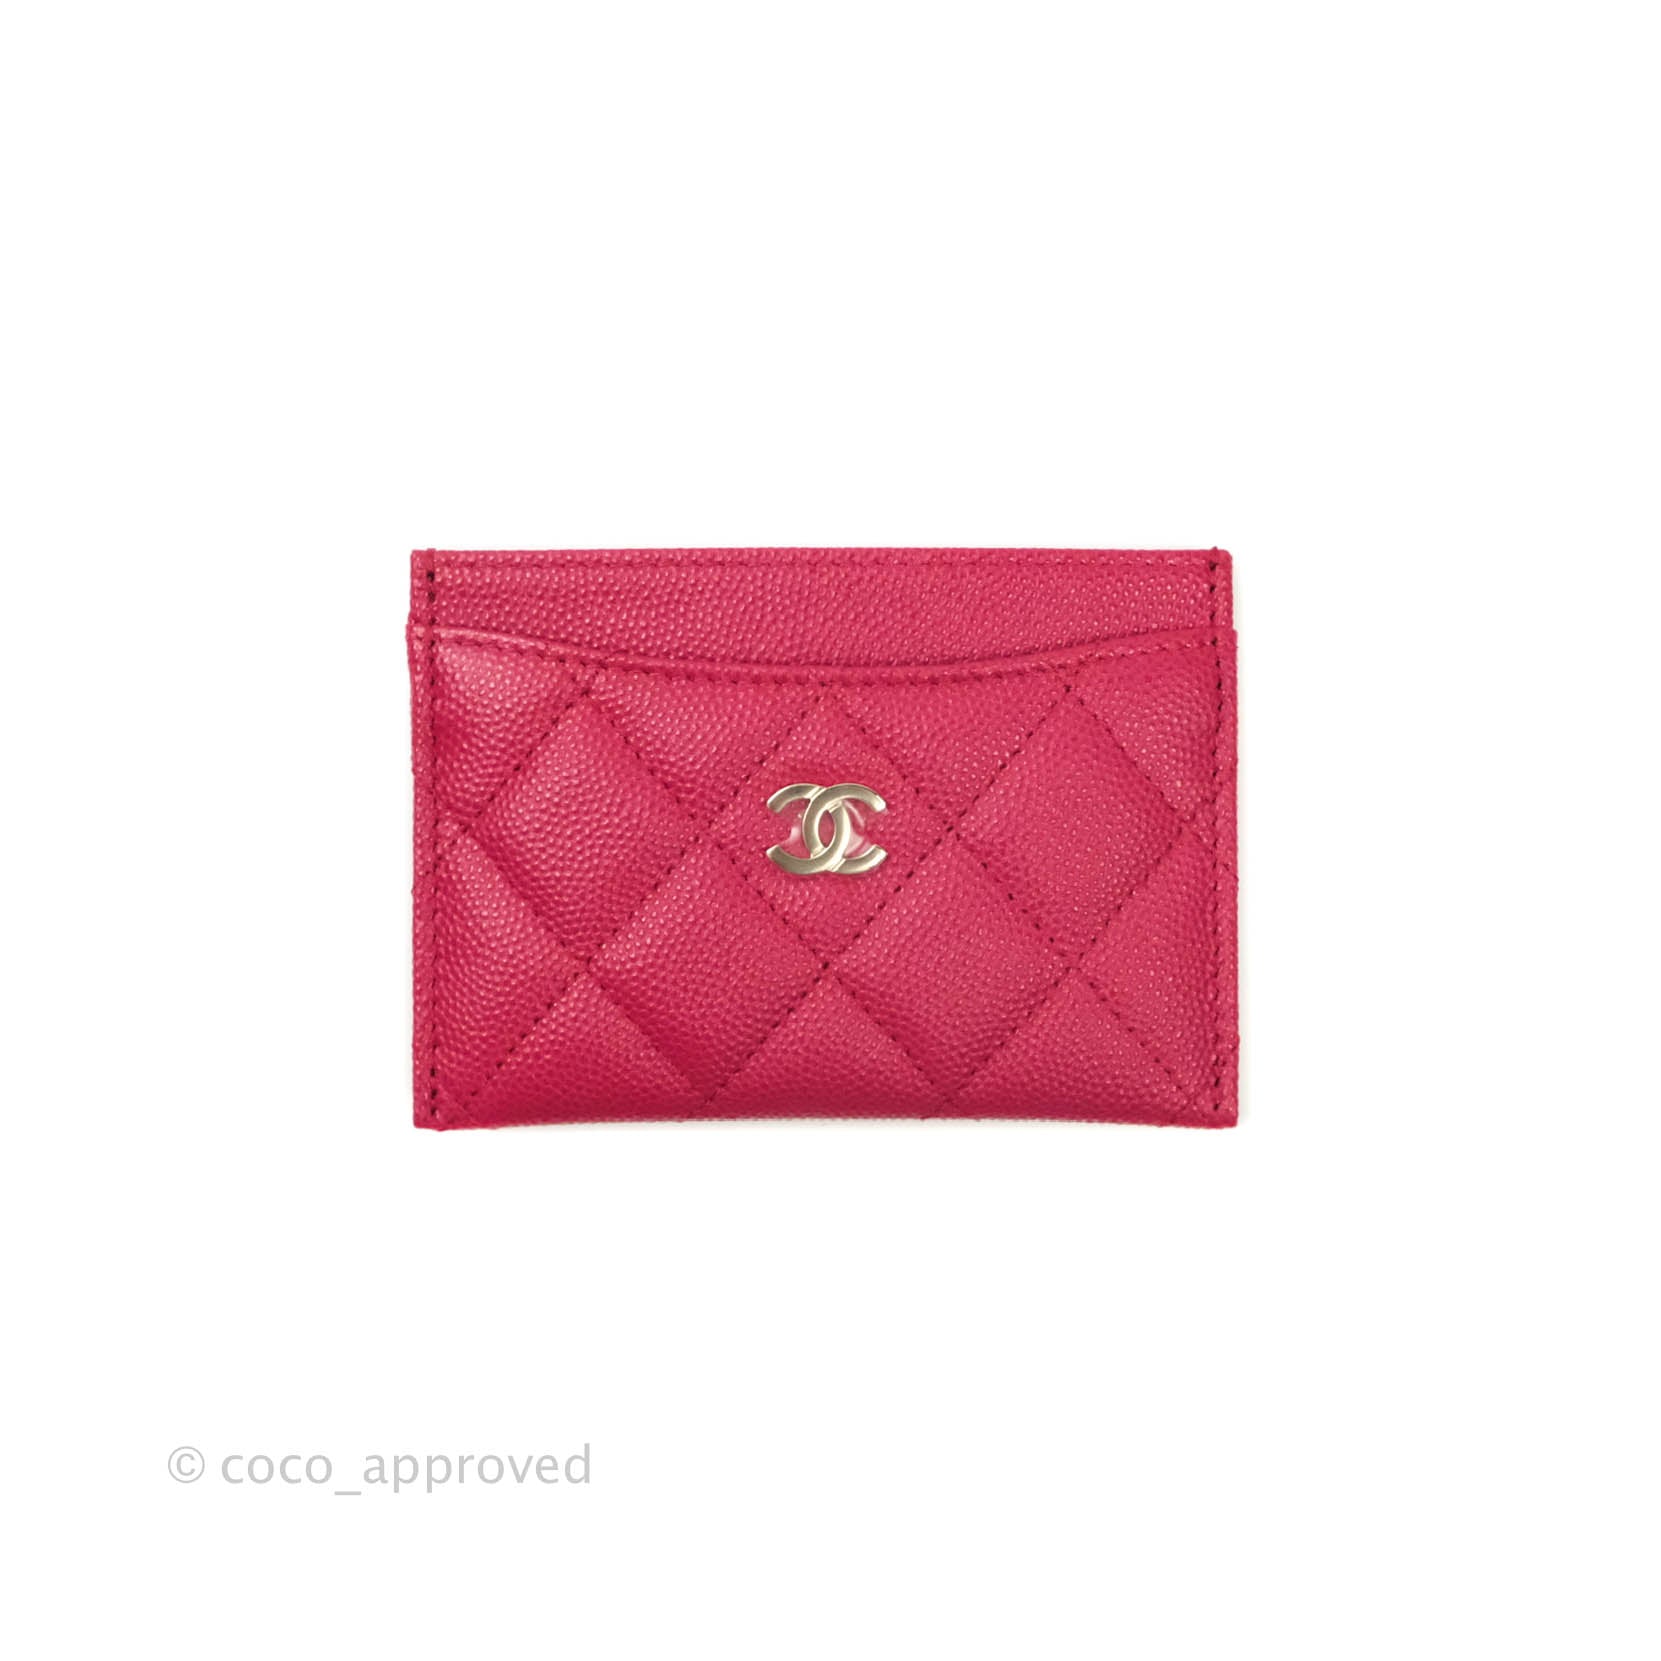 CHANEL Classic Card Holder, Caviar Leather (Grained Calfskin) with Gold CC  Logo